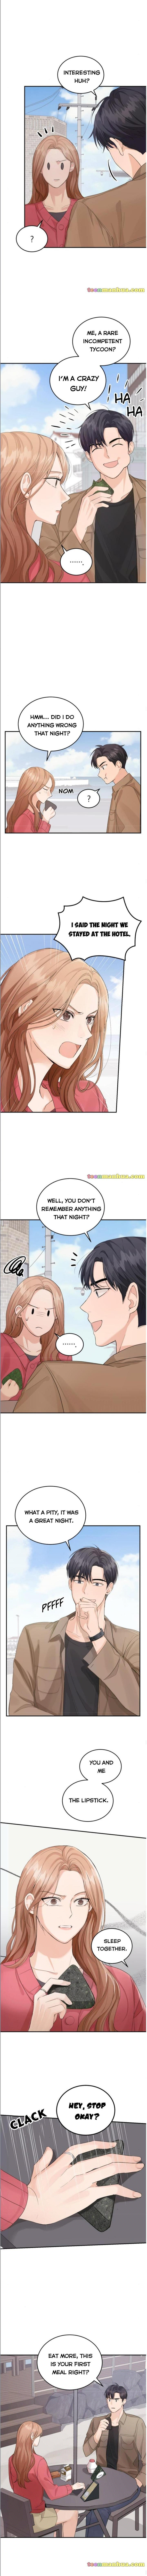 The Essence Of A Perfect Marriage Chapter 7 page 7 - Mangakakalot